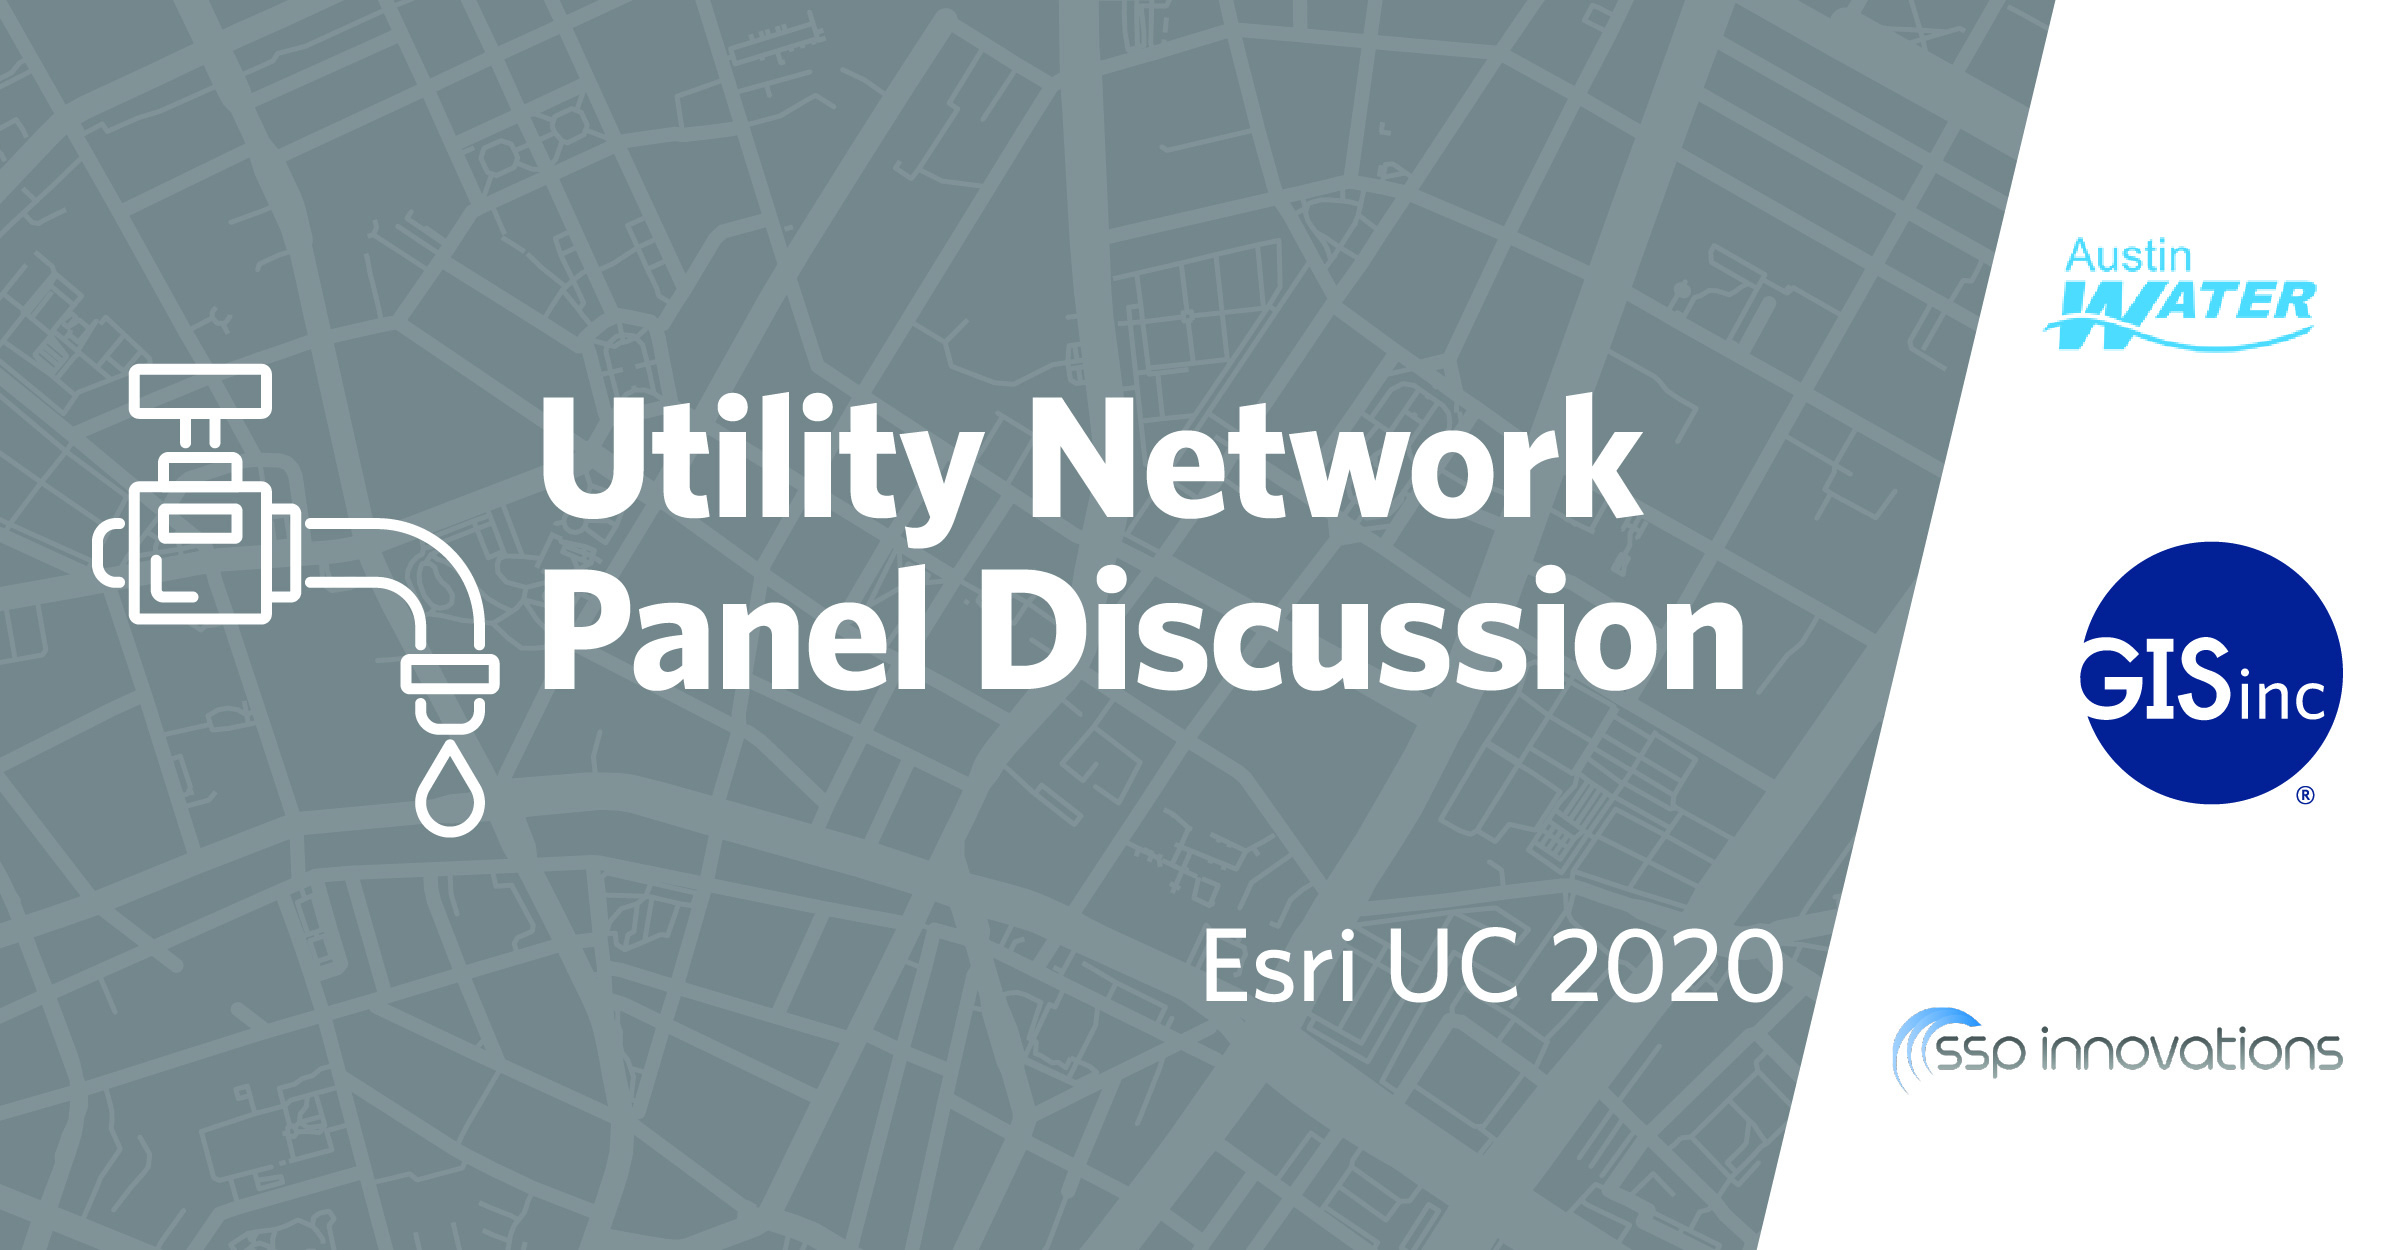 Utility Network Panel Discussion at the Esri UC 2020 - Q&A